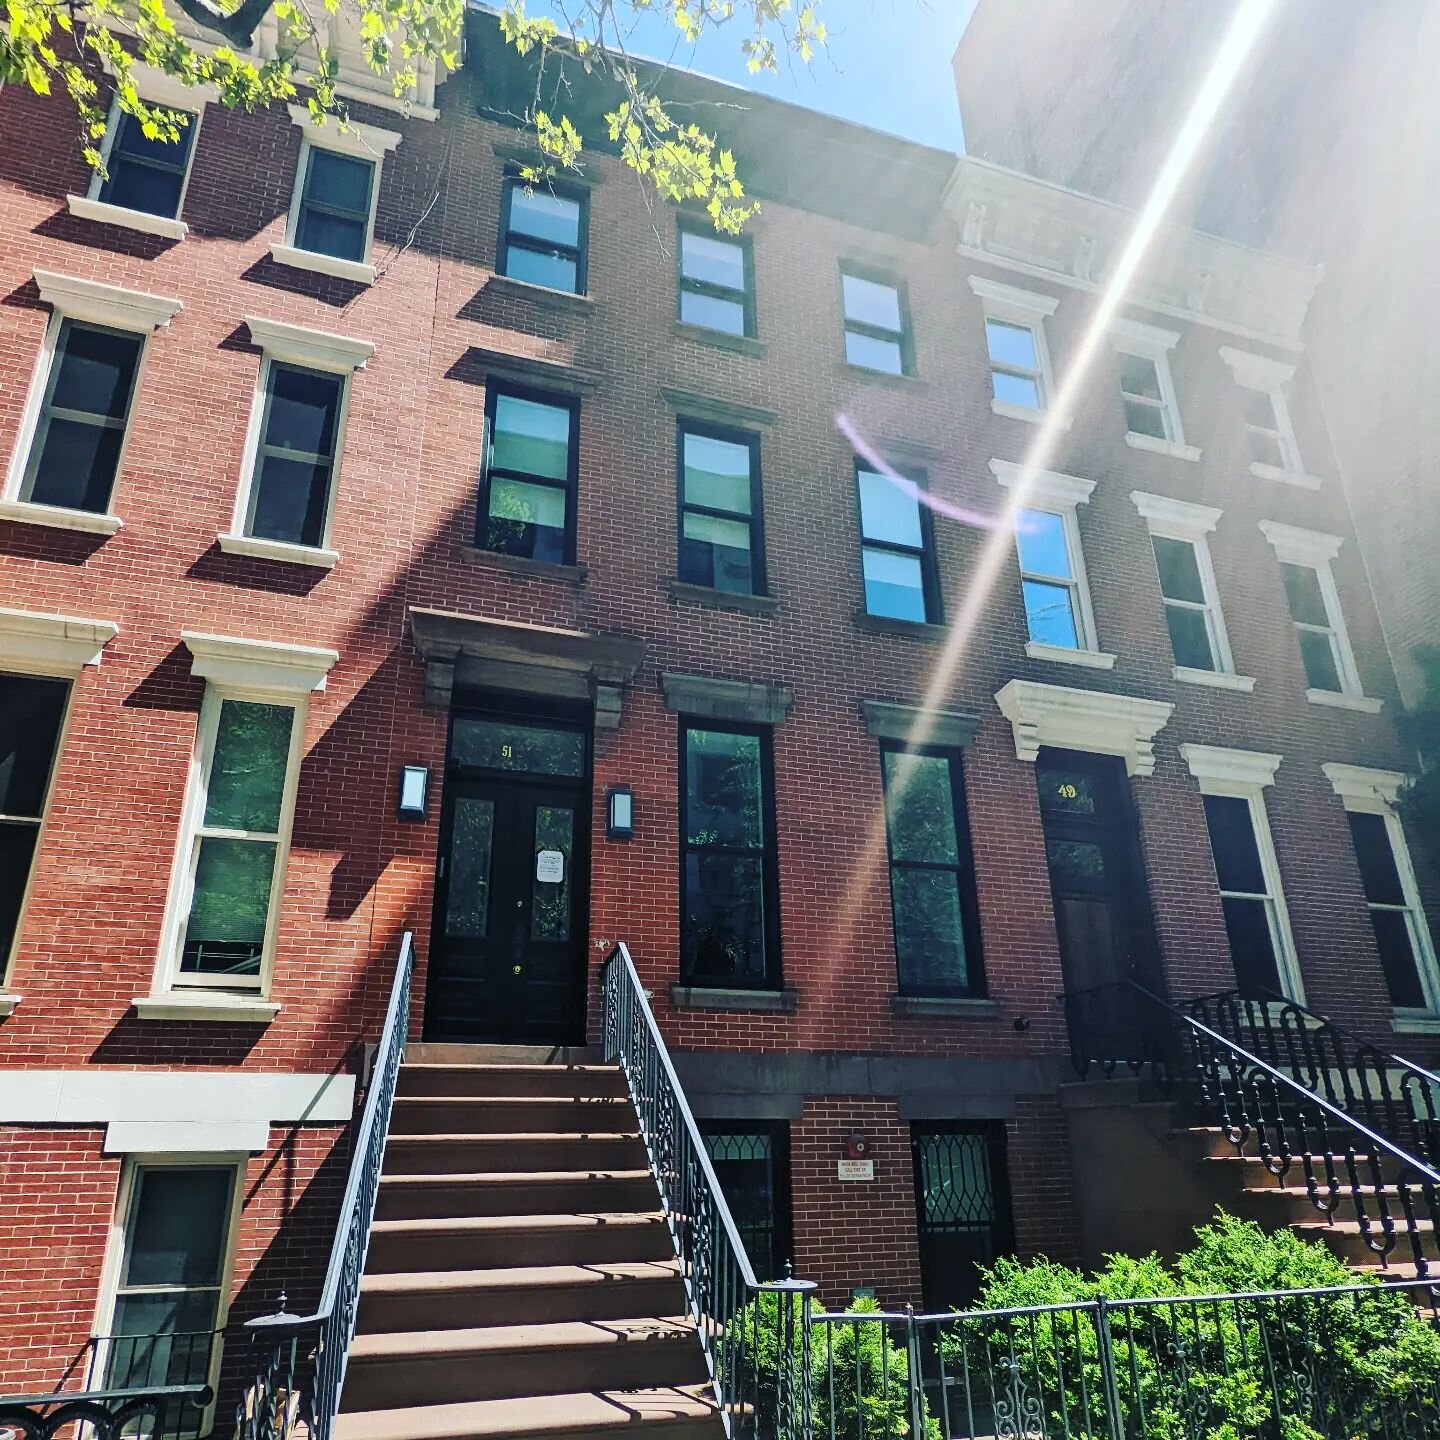 One of our newer projects is this 6 story townhouse on the Upper West Side. It's a beautiful home that has lots of potential to become a great property. 

#renovation 
#townhouse 
#manhattan 
#uws
#ues
#nyc
#newyorkcity 
#newyork 
#brownstone 
#brook